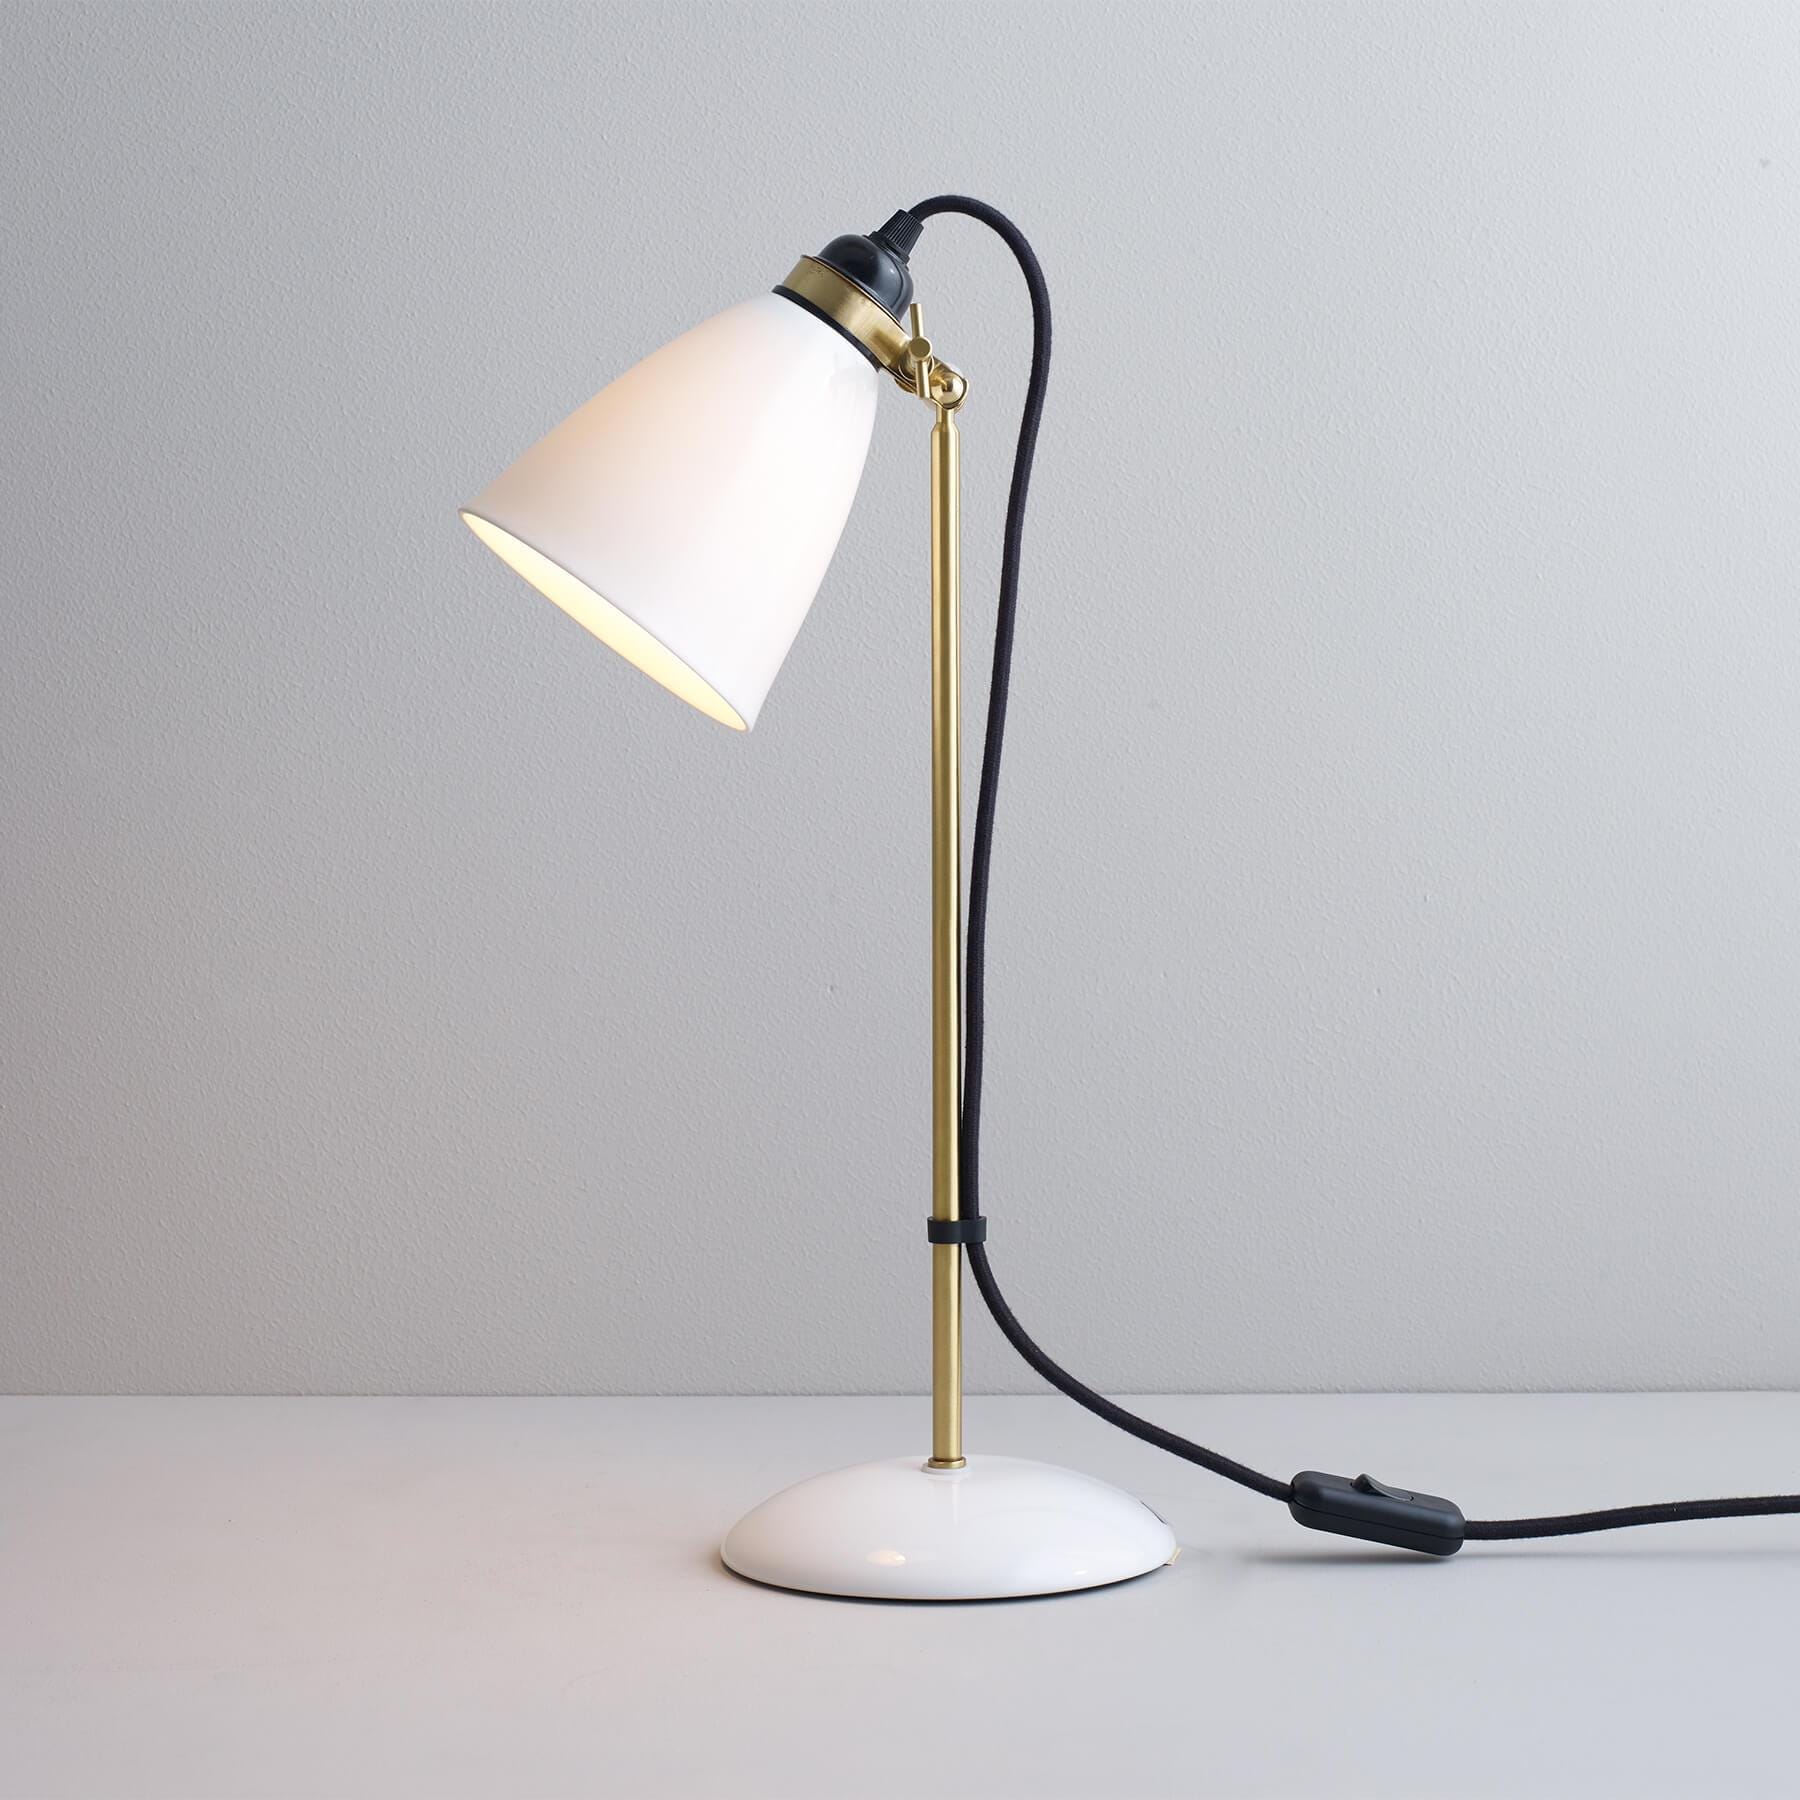 Original Btc Hector 30 Table Lamp Black Cable White Designer Lighting From Holloways Of Ludlow